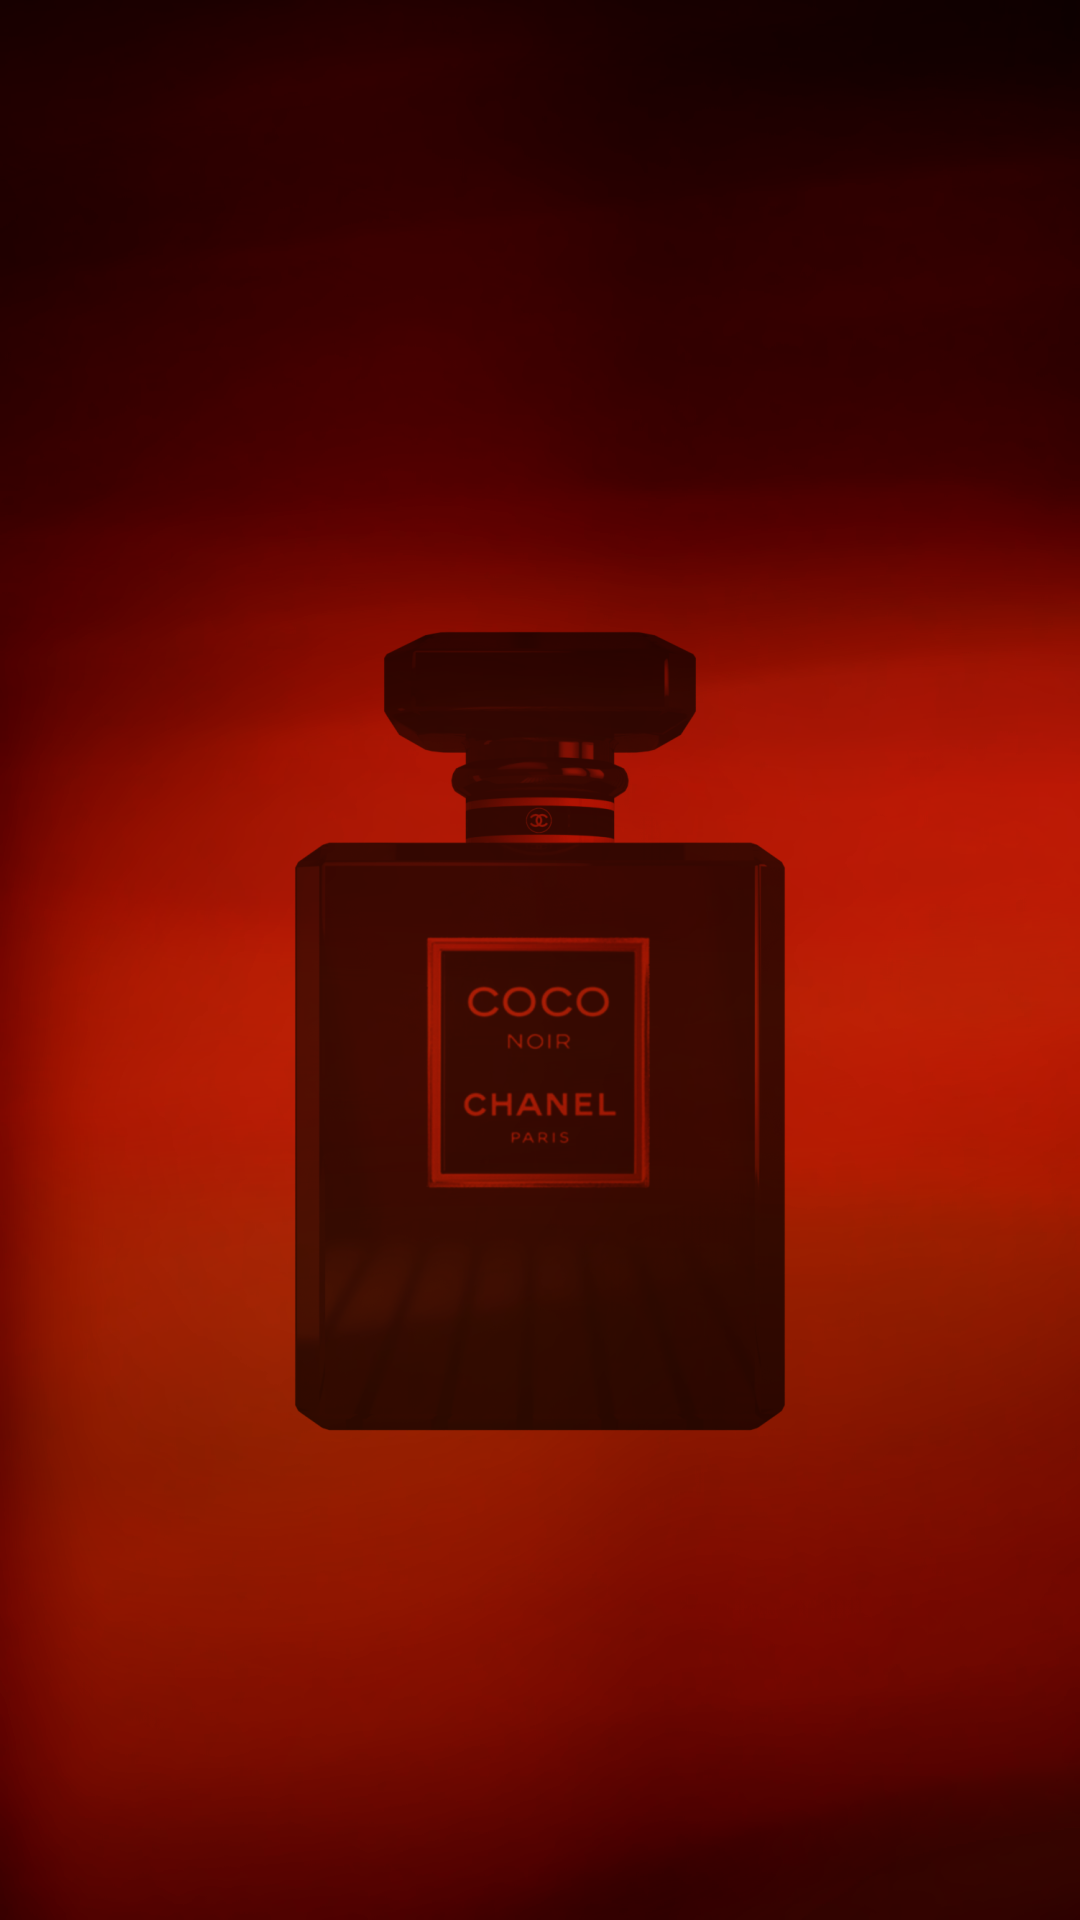 Coco Noir… Light by Chanel – Undina's Looking Glass